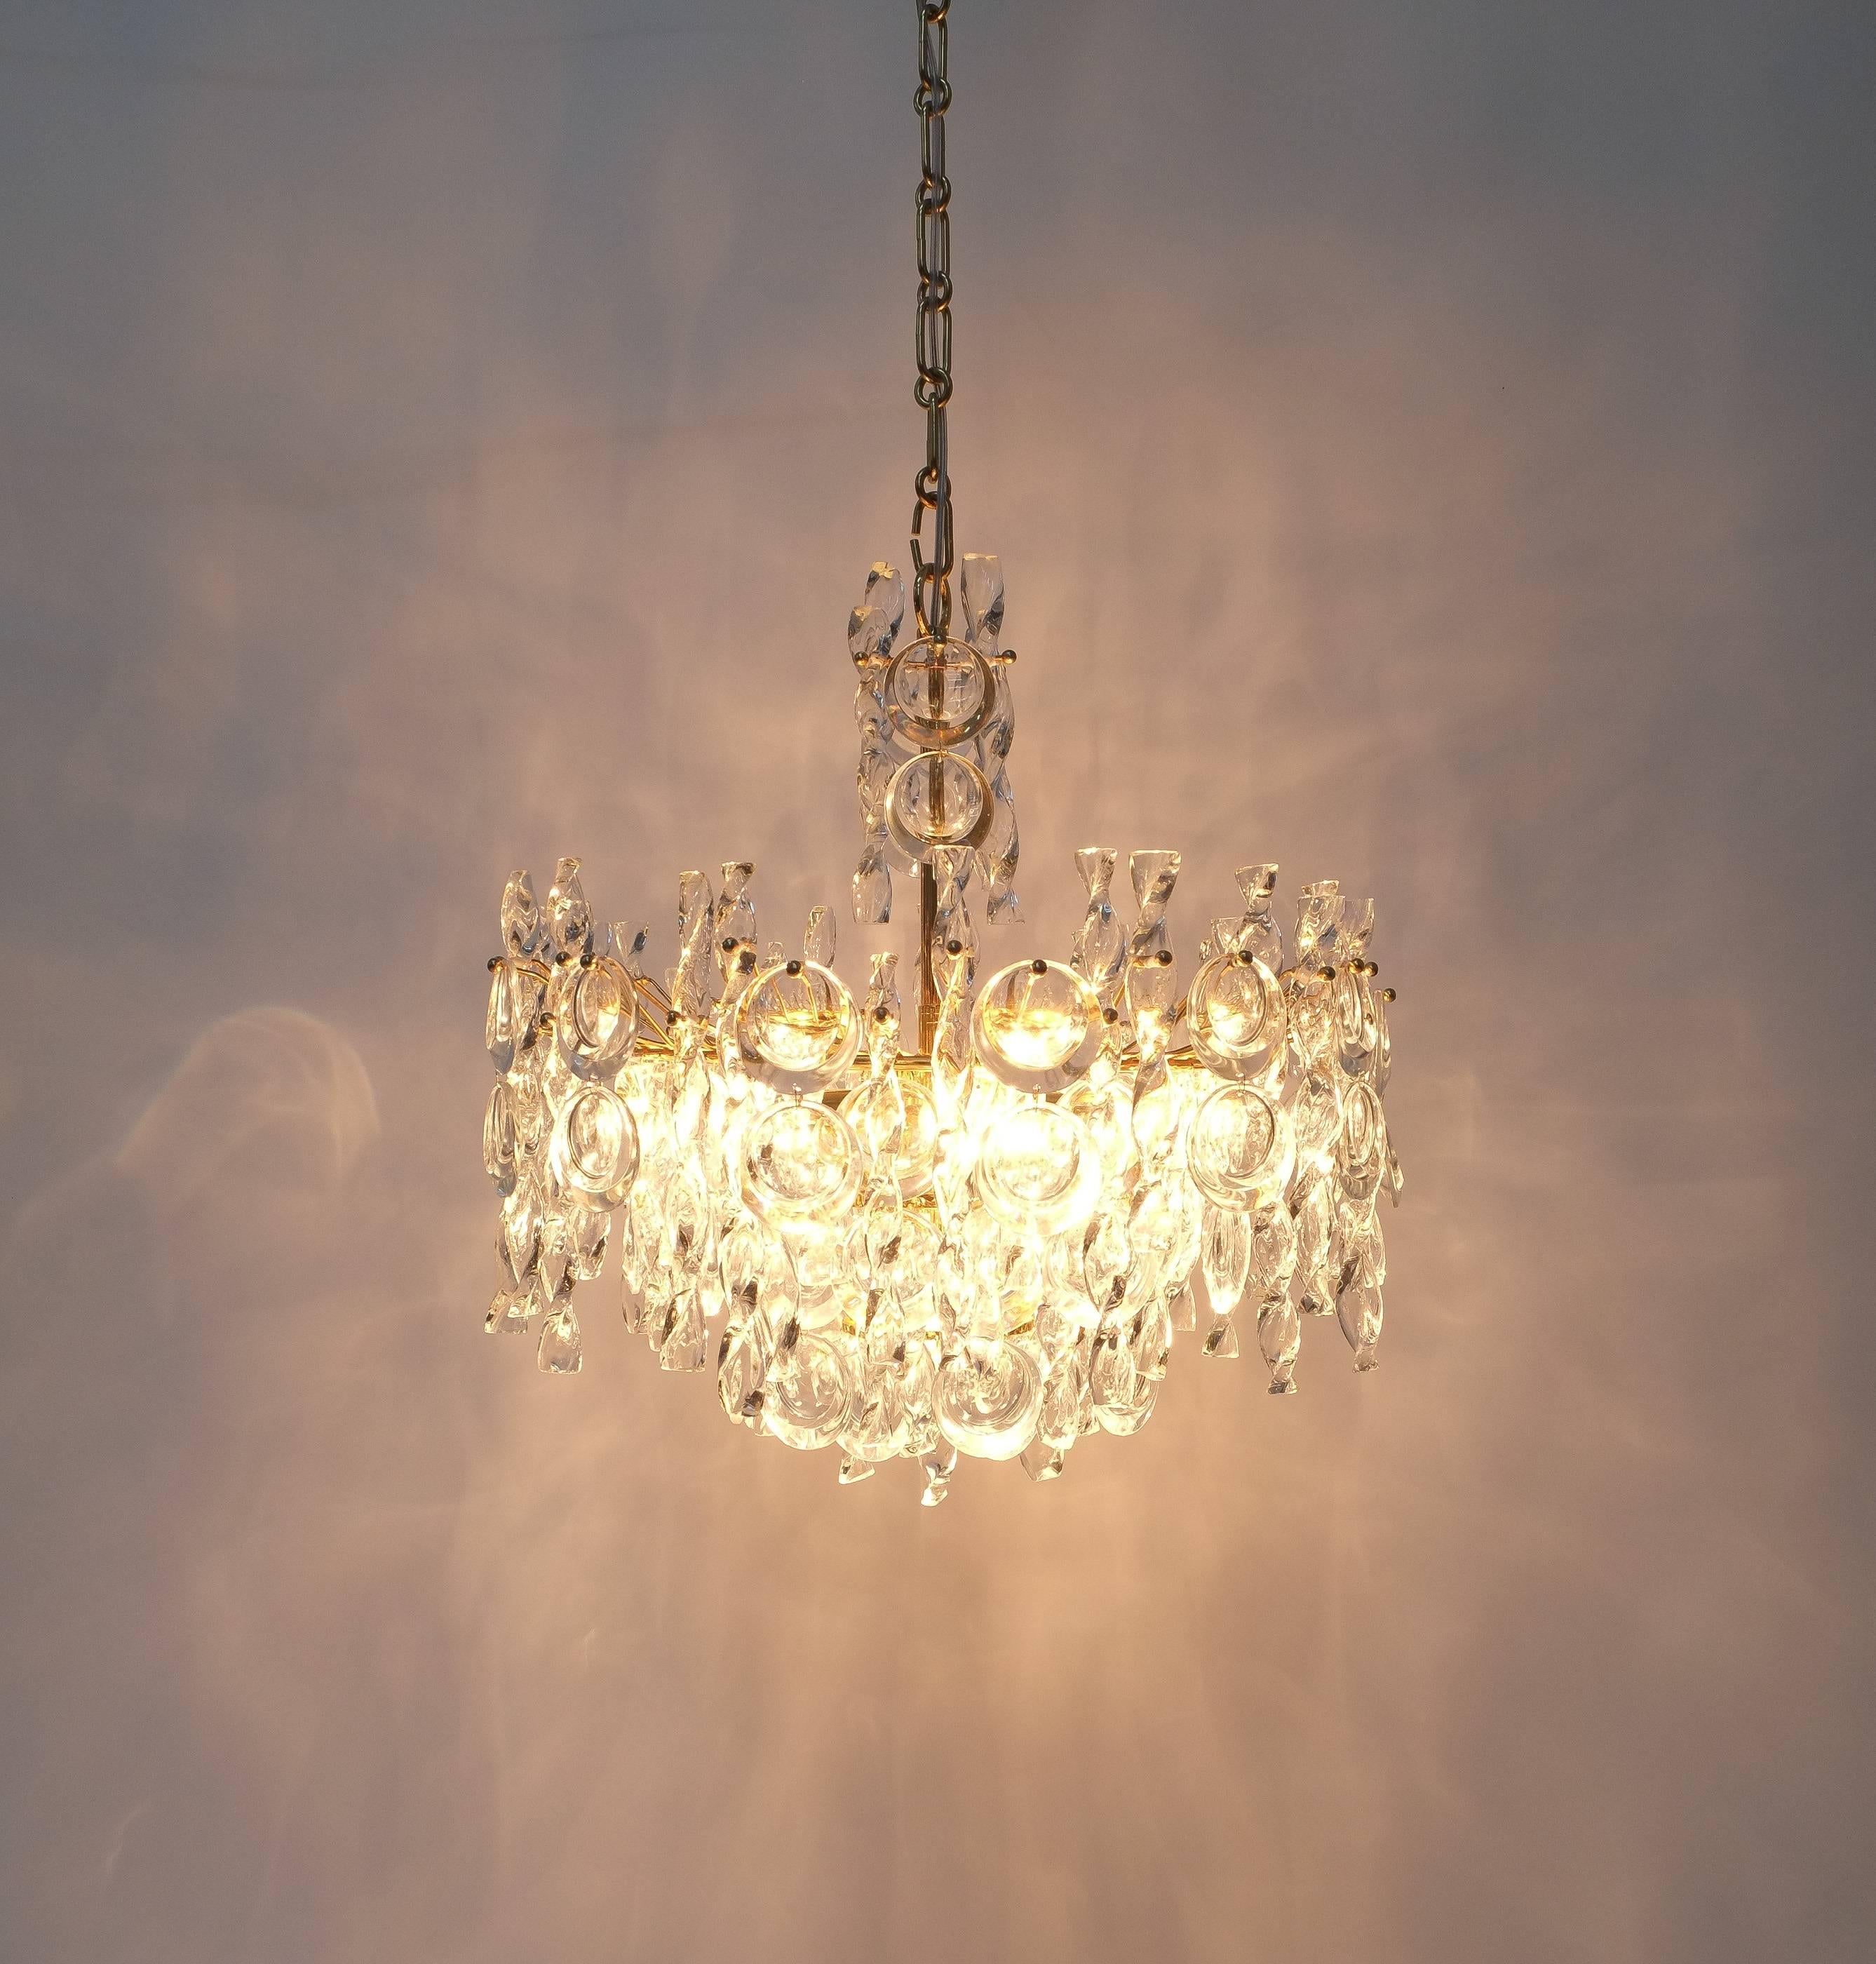 Beautiful refurbished 21 inch chandelier by Palwa, Germany 1960 comprised of glass tendril twisted ribbons and lens shaped crystals. The brass hardware has been newly gold plated. Classical yet minimalistic handmade piece executed with a taste for